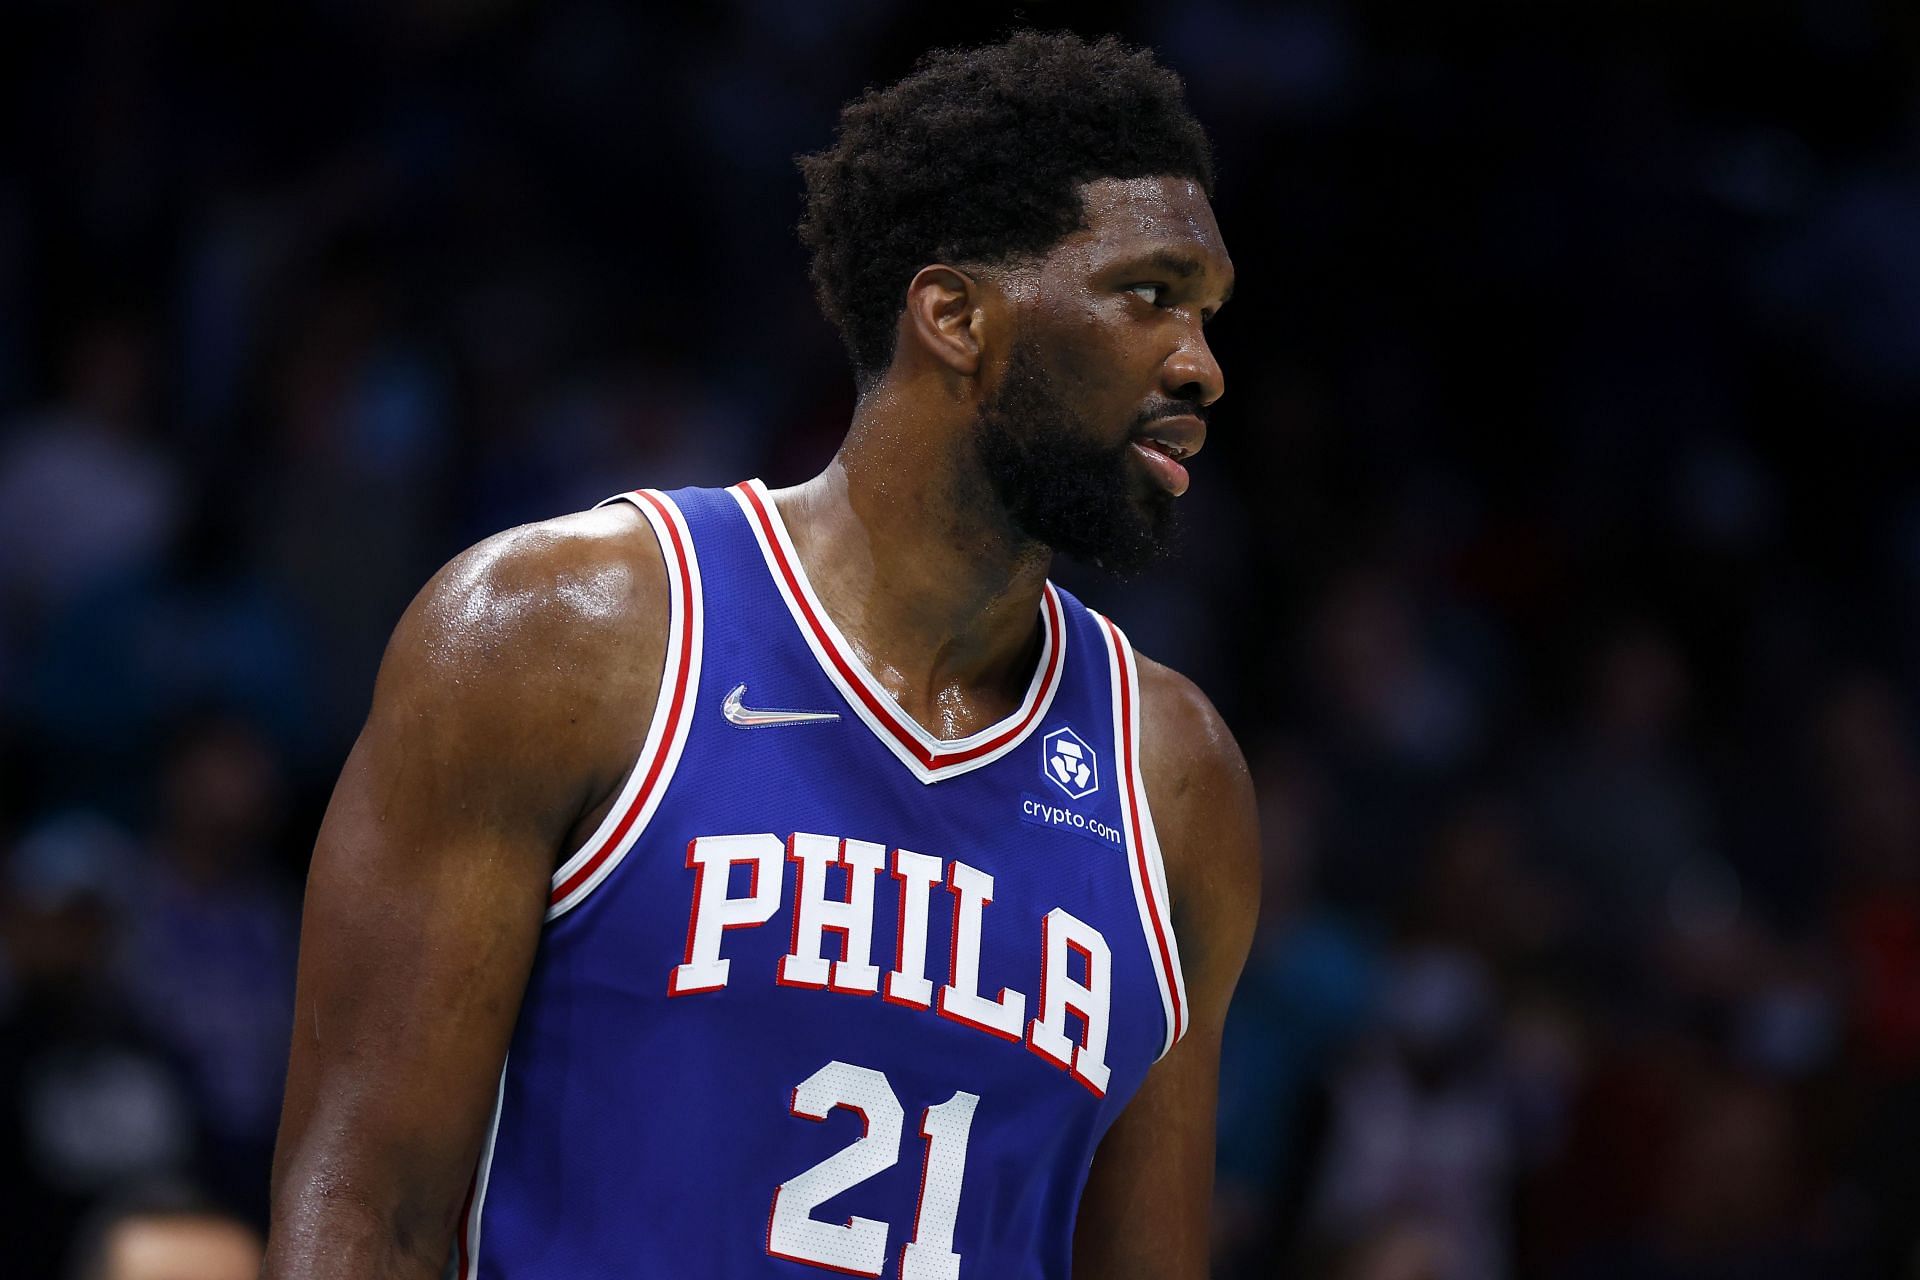 Joel Embiid #21 of the Philadelphia 76ers looks on during the second half of the game against the Charlotte Hornets at Spectrum Center on December 06, 2021 in Charlotte, North Carolina.